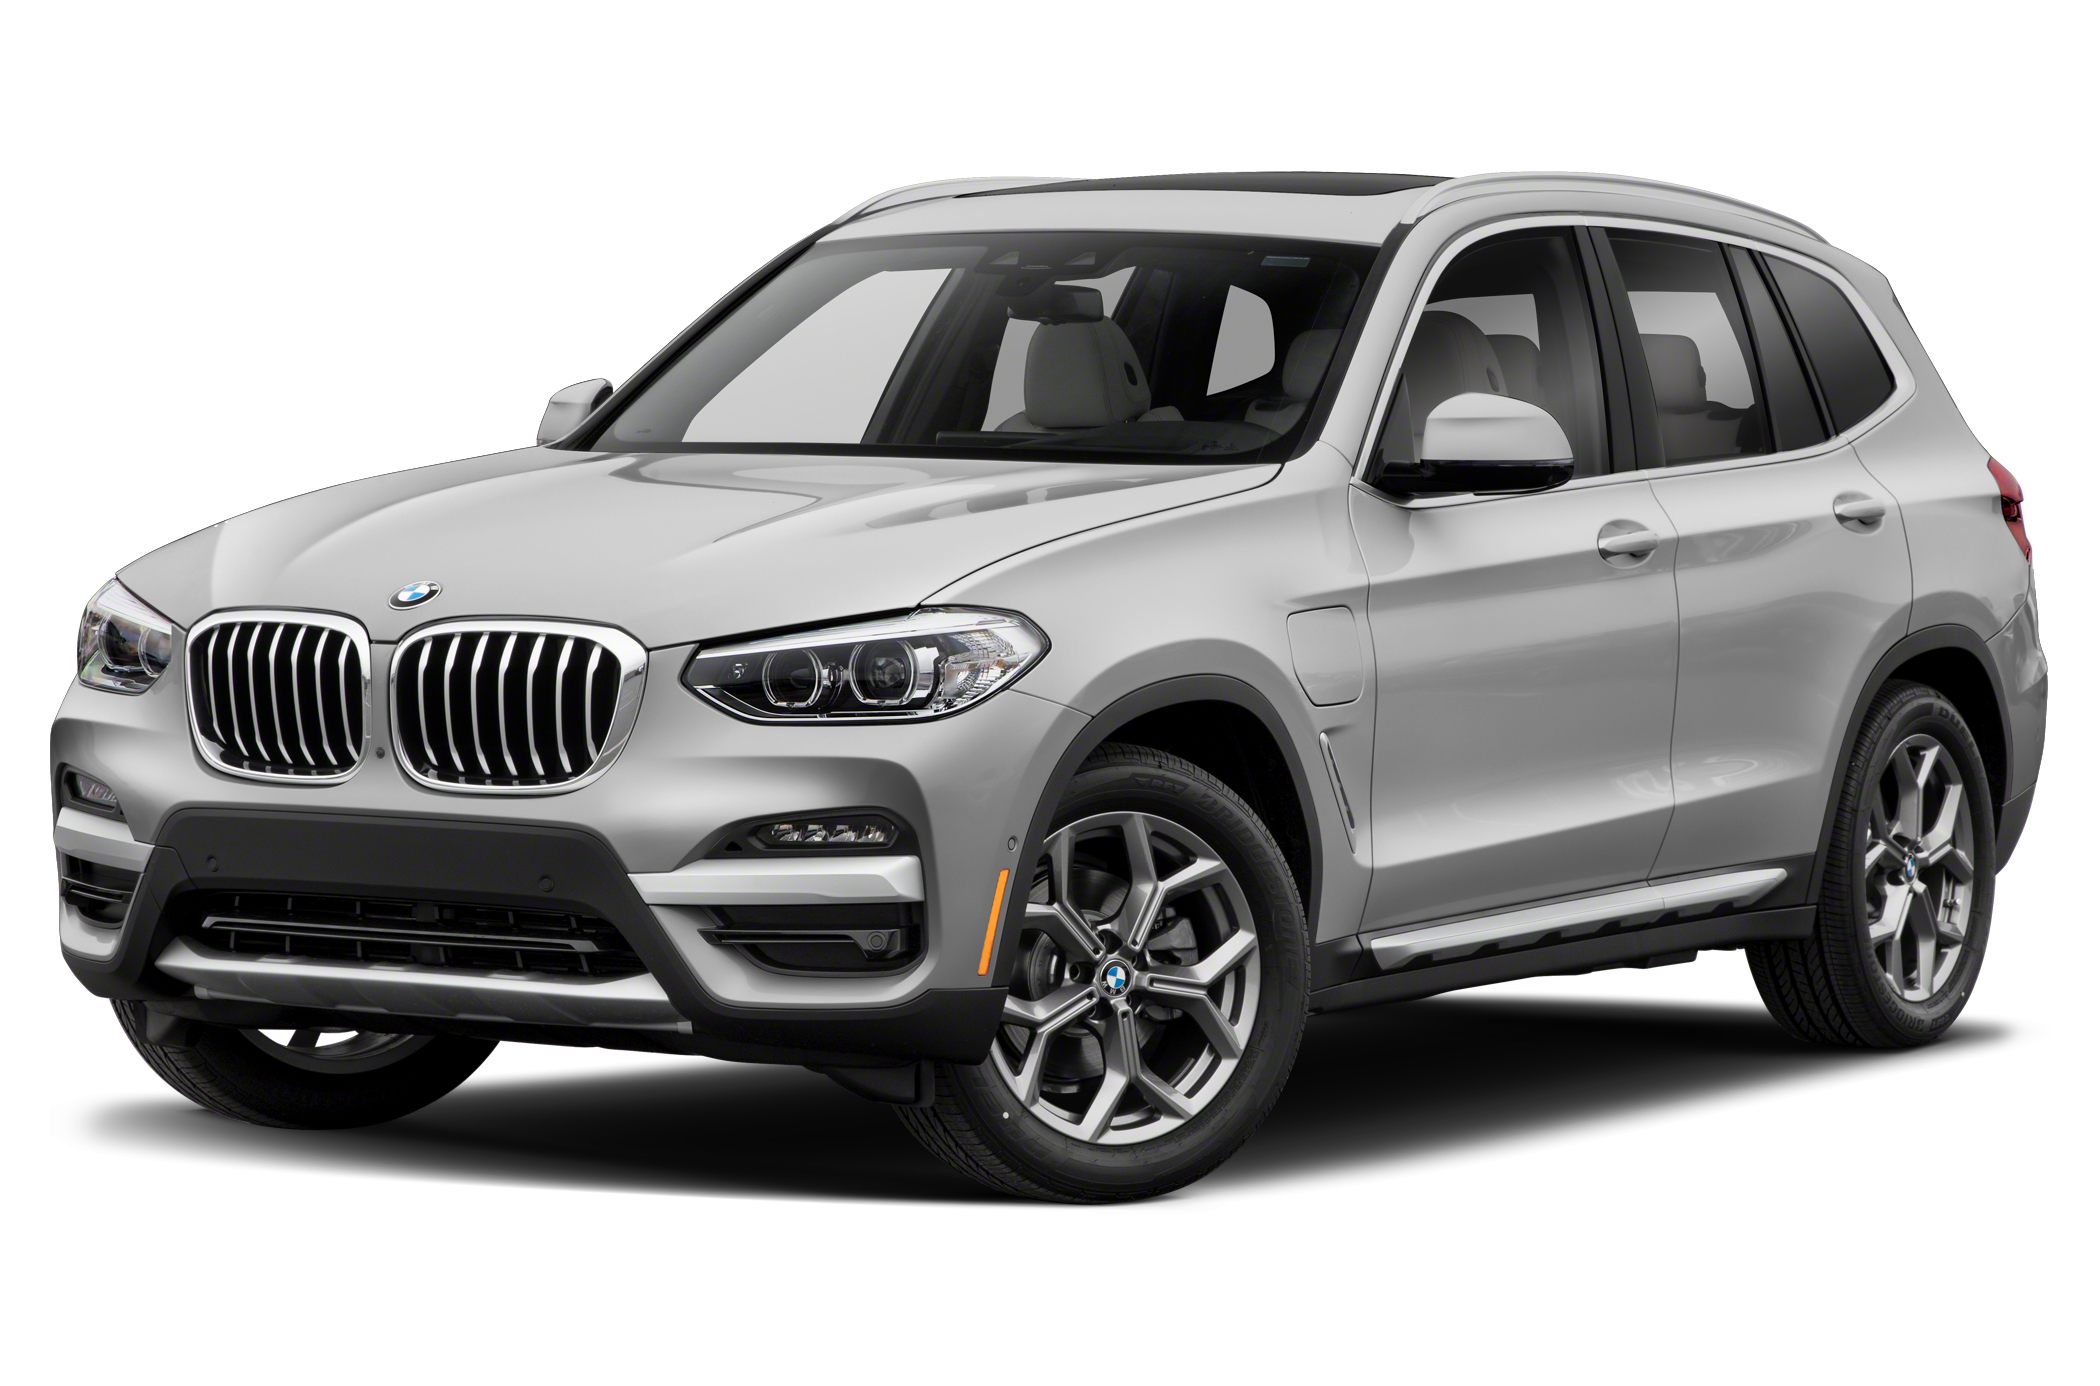 Bmw X3 Hybrid Review 2021 Amazon Com 2021 Bmw X3 Reviews Images And 